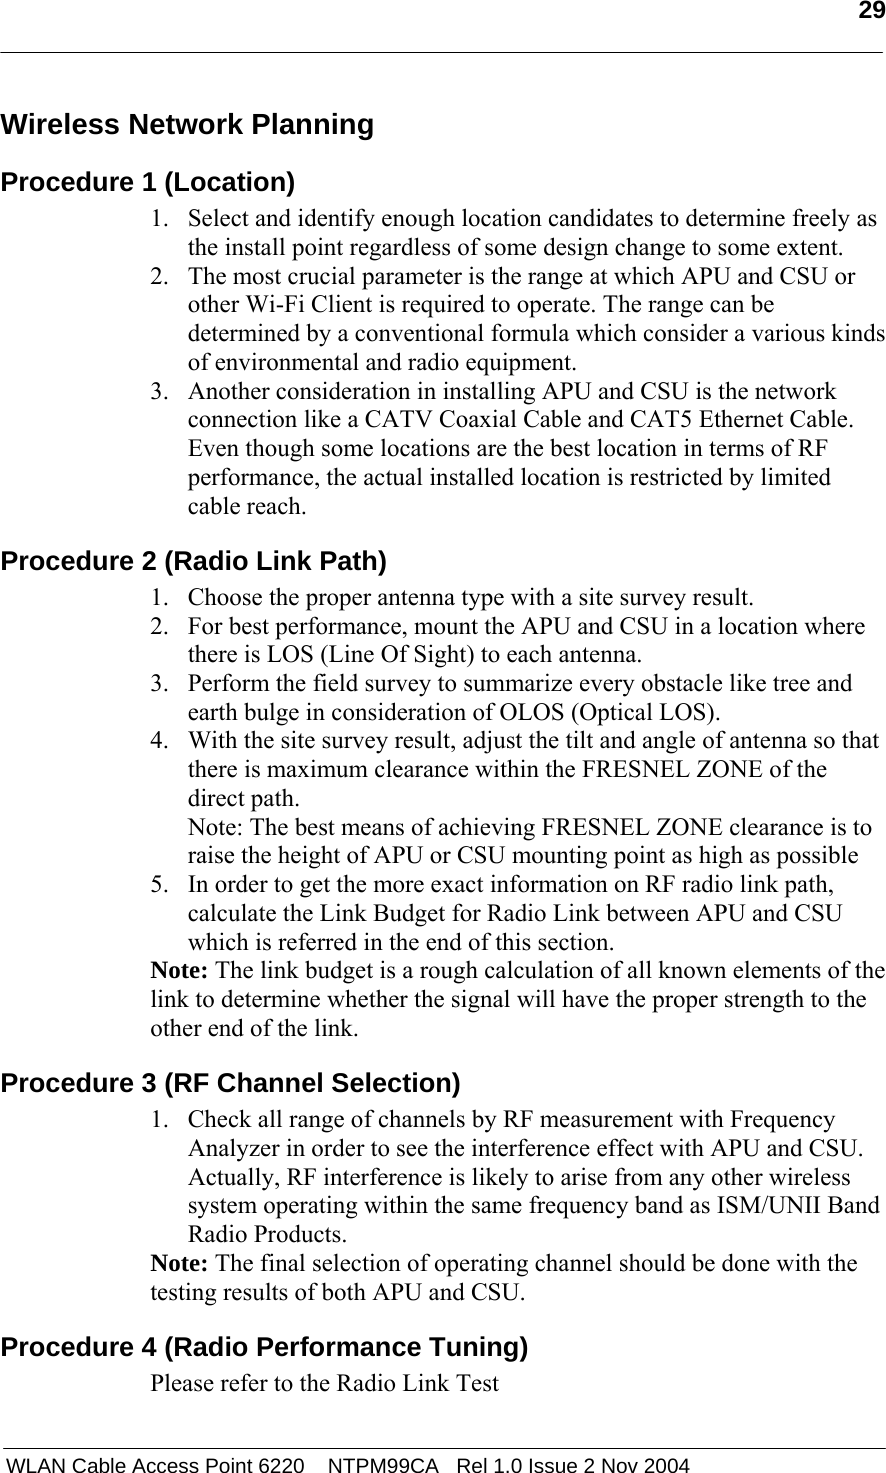   29   WLAN Cable Access Point 6220    NTPM99CA   Rel 1.0 Issue 2 Nov 2004 Wireless Network Planning  Procedure 1 (Location) 1. Select and identify enough location candidates to determine freely as the install point regardless of some design change to some extent. 2. The most crucial parameter is the range at which APU and CSU or other Wi-Fi Client is required to operate. The range can be determined by a conventional formula which consider a various kinds of environmental and radio equipment. 3. Another consideration in installing APU and CSU is the network connection like a CATV Coaxial Cable and CAT5 Ethernet Cable.  Even though some locations are the best location in terms of RF performance, the actual installed location is restricted by limited cable reach. Procedure 2 (Radio Link Path) 1. Choose the proper antenna type with a site survey result. 2. For best performance, mount the APU and CSU in a location where there is LOS (Line Of Sight) to each antenna.  3. Perform the field survey to summarize every obstacle like tree and earth bulge in consideration of OLOS (Optical LOS).  4. With the site survey result, adjust the tilt and angle of antenna so that there is maximum clearance within the FRESNEL ZONE of the direct path.  Note: The best means of achieving FRESNEL ZONE clearance is to raise the height of APU or CSU mounting point as high as possible 5. In order to get the more exact information on RF radio link path, calculate the Link Budget for Radio Link between APU and CSU which is referred in the end of this section. Note: The link budget is a rough calculation of all known elements of the link to determine whether the signal will have the proper strength to the other end of the link.  Procedure 3 (RF Channel Selection) 1. Check all range of channels by RF measurement with Frequency Analyzer in order to see the interference effect with APU and CSU. Actually, RF interference is likely to arise from any other wireless system operating within the same frequency band as ISM/UNII Band Radio Products.  Note: The final selection of operating channel should be done with the testing results of both APU and CSU. Procedure 4 (Radio Performance Tuning) Please refer to the Radio Link Test 